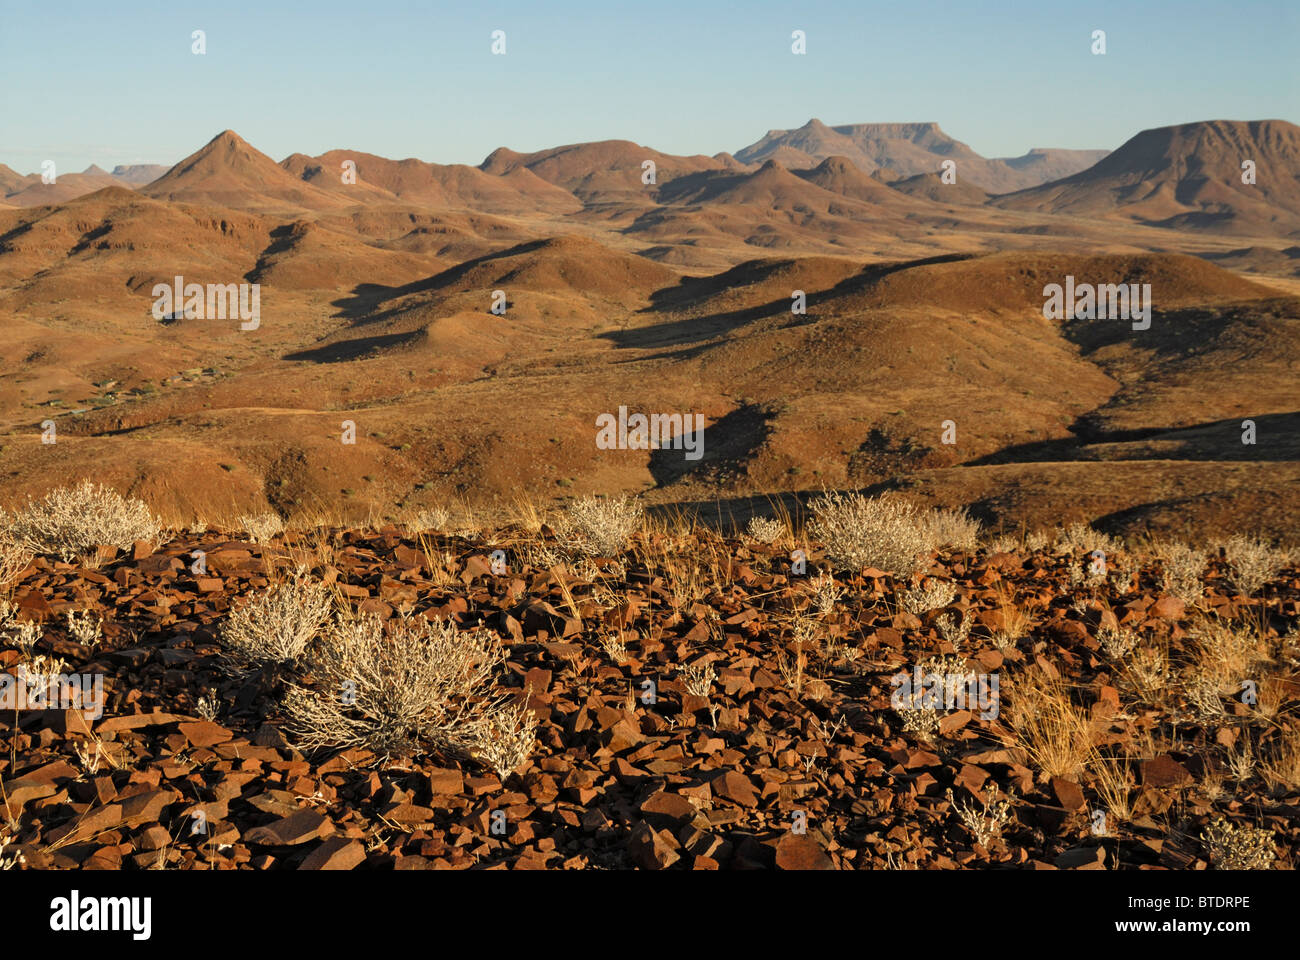 Scenic view of hills and mountains, Commiphora species in foreground Stock Photo